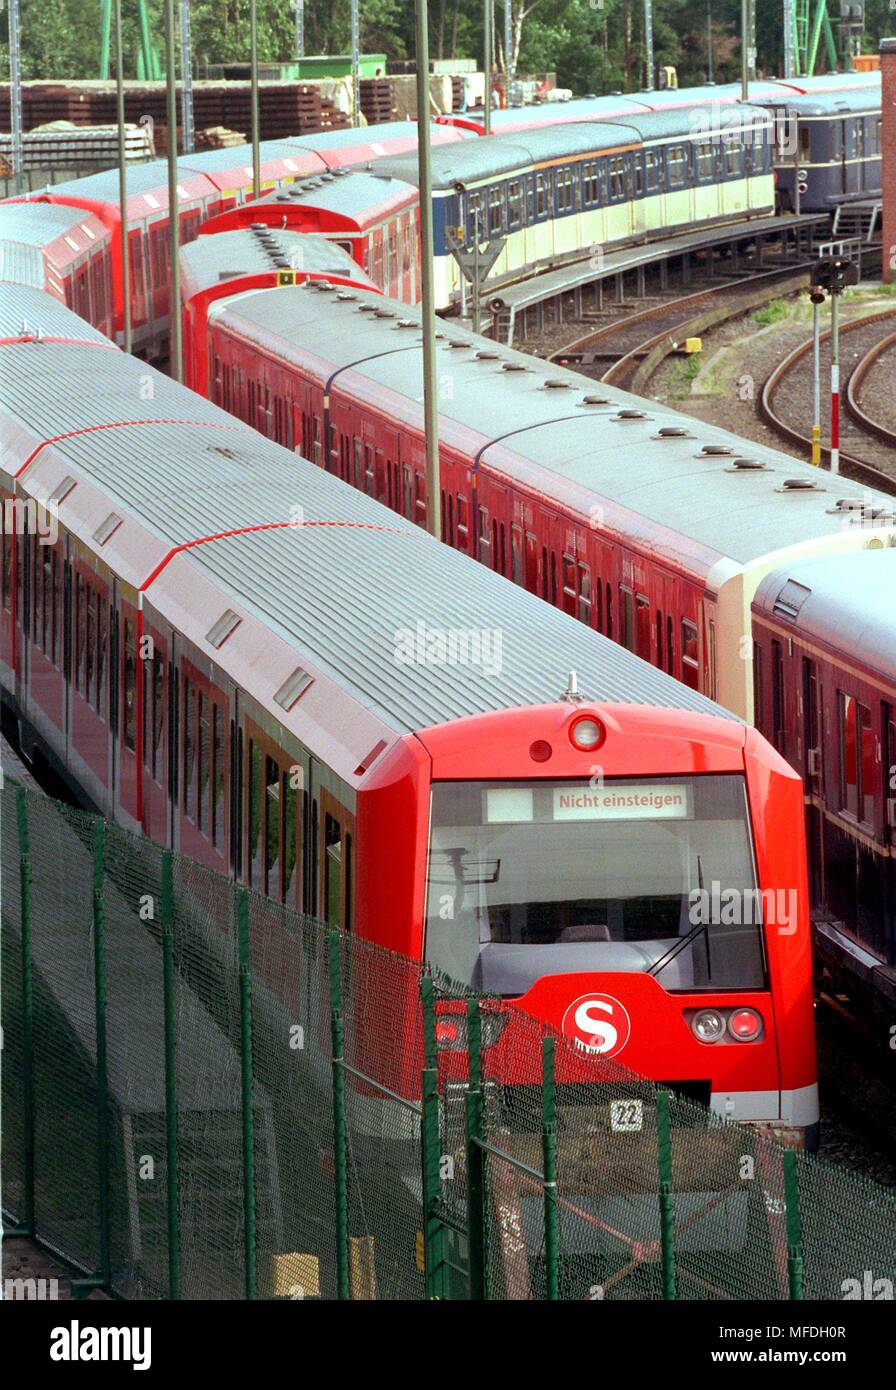 At the depot in Hamburg-Ohlsdorf on 15.6.1998 S-Bahn train of the newest generation. The 25 trains had been pulled out of service the day before (14.6.), After a wheel break had occurred on a light rail. The breakage of a wheel tire is considered as the cause of the ICE accident of Eschede. | usage worldwide Stock Photo